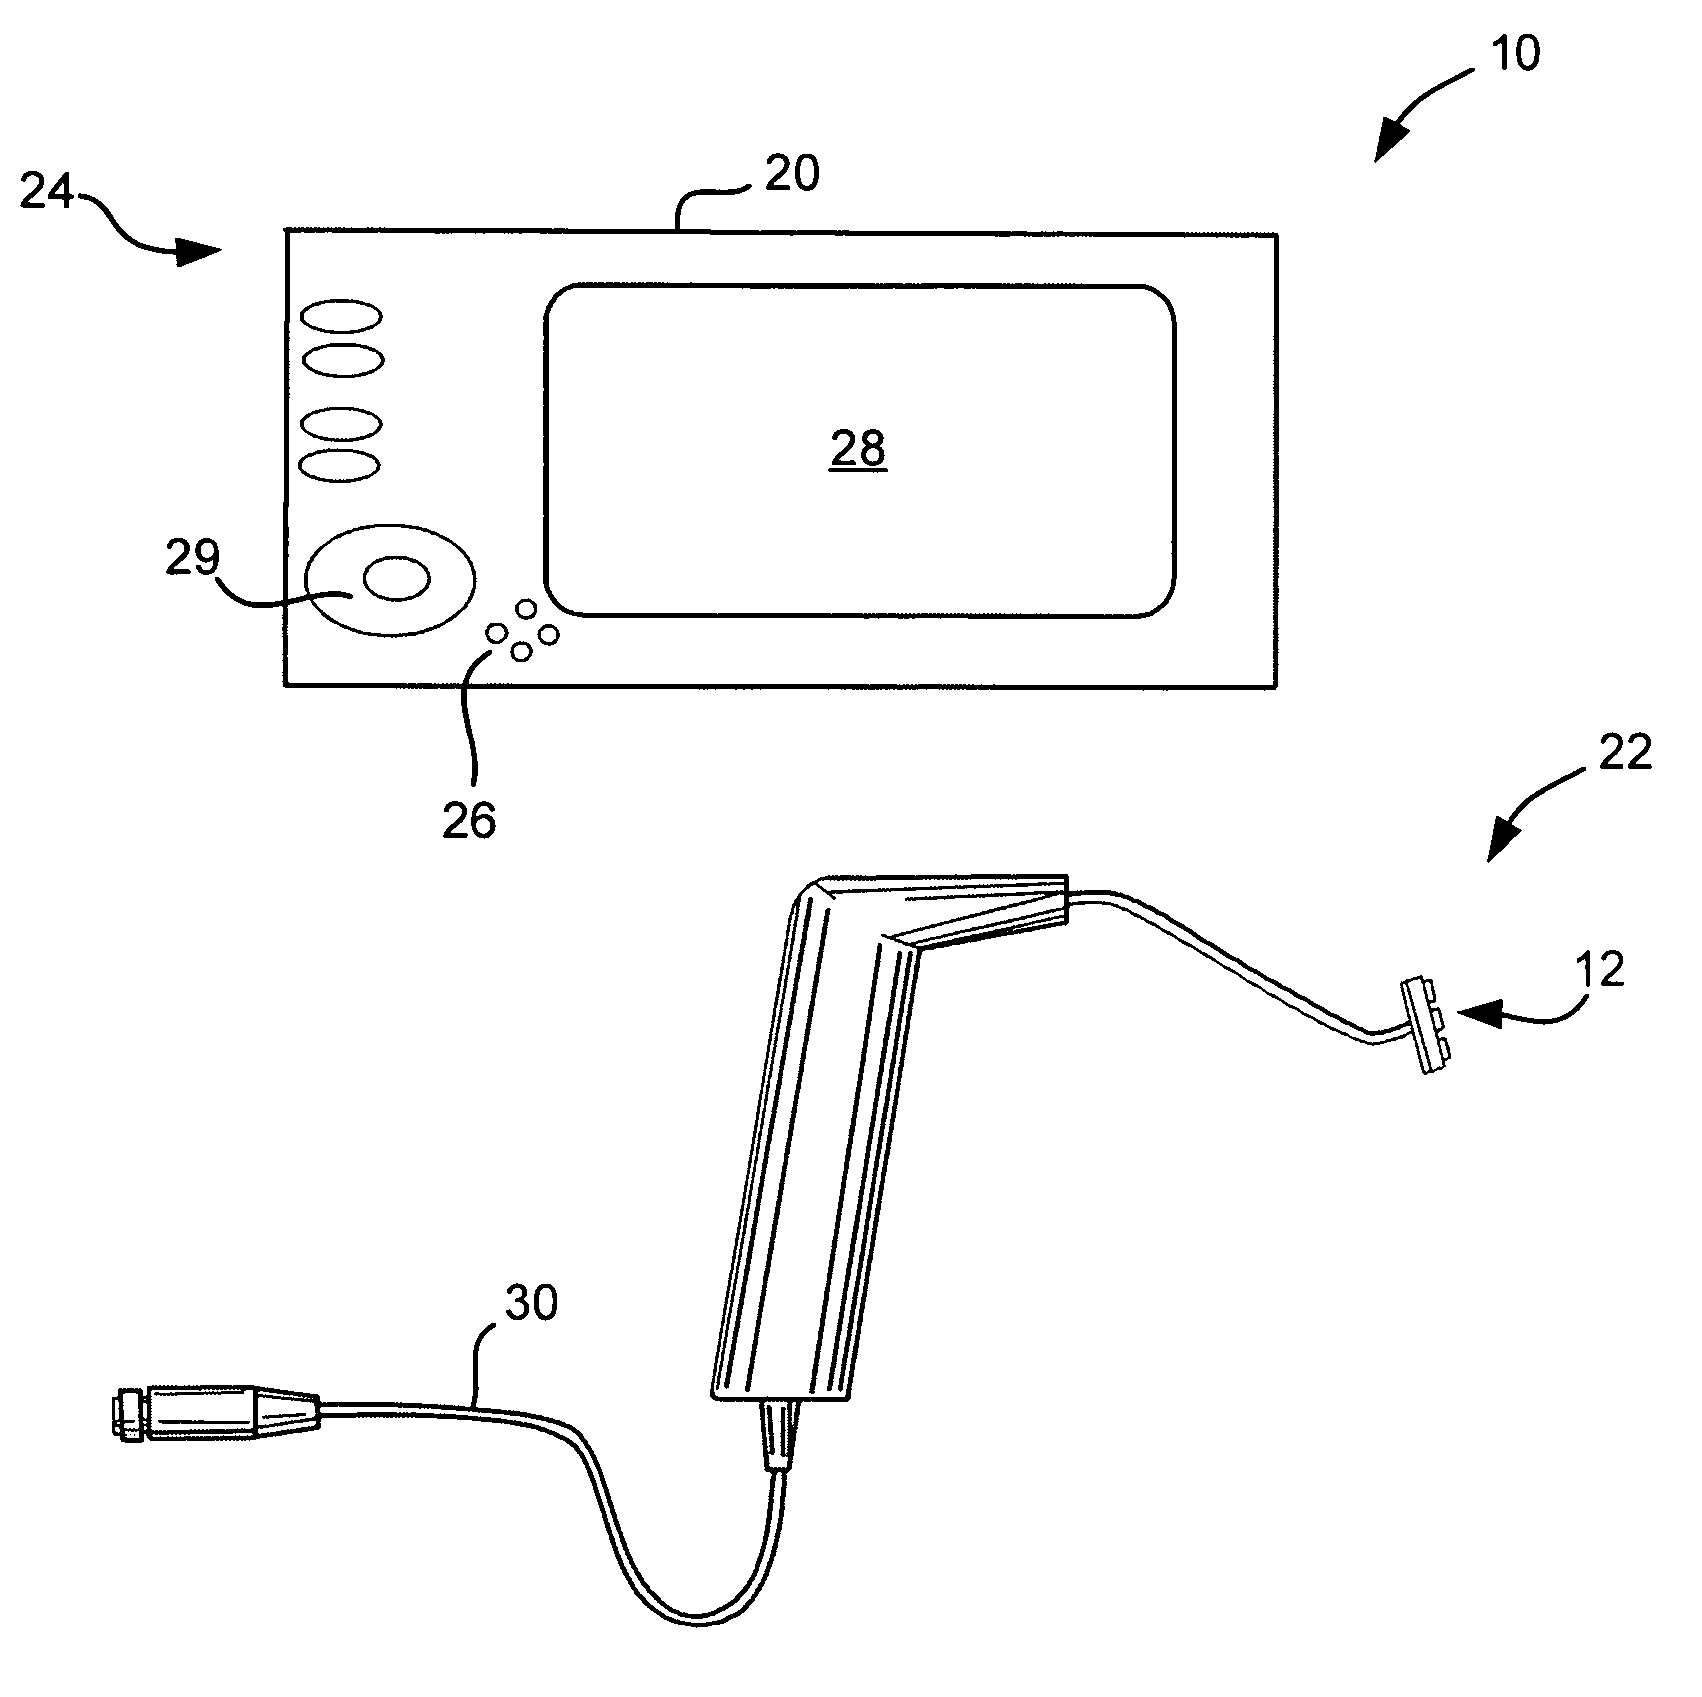 Adjustable open loop control devices and methods